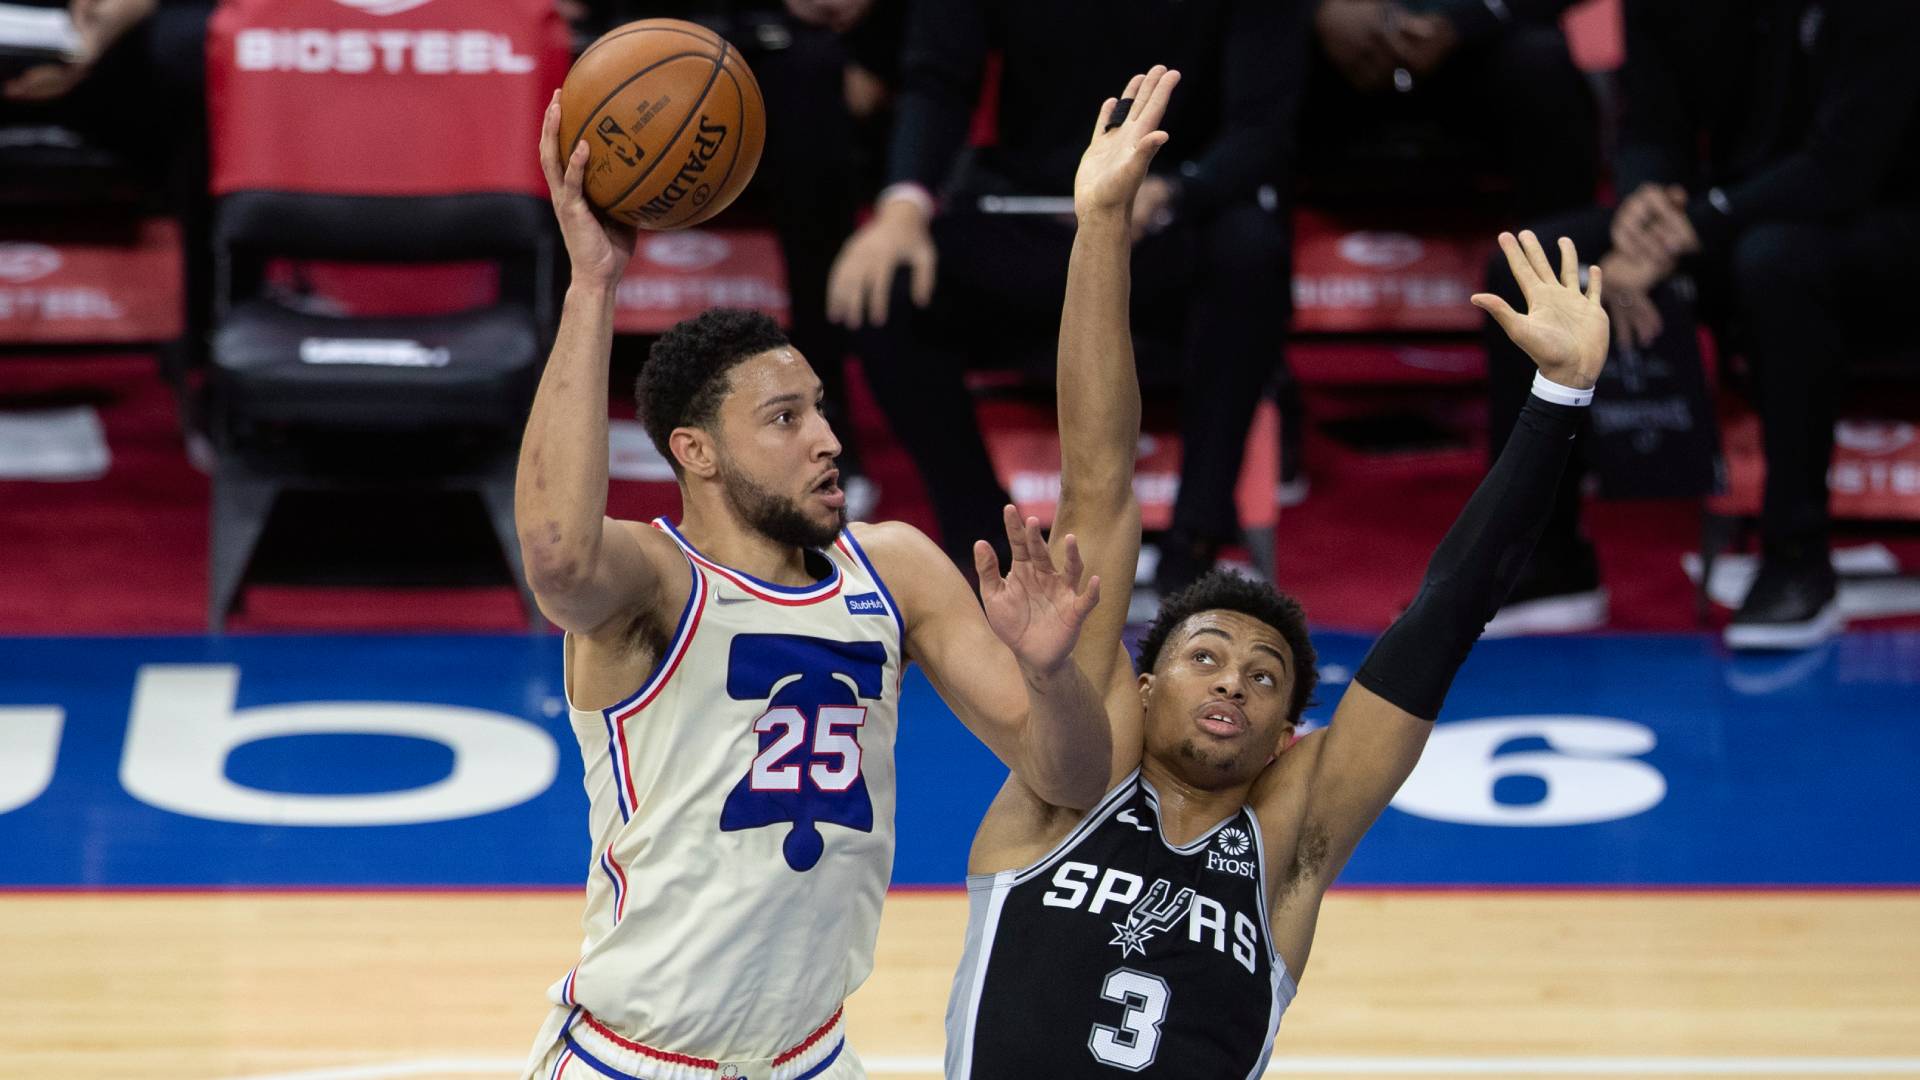 Ben Simmons trade rumors: 76ers star 'would welcome opportunity' to play for Popovich, Spurs